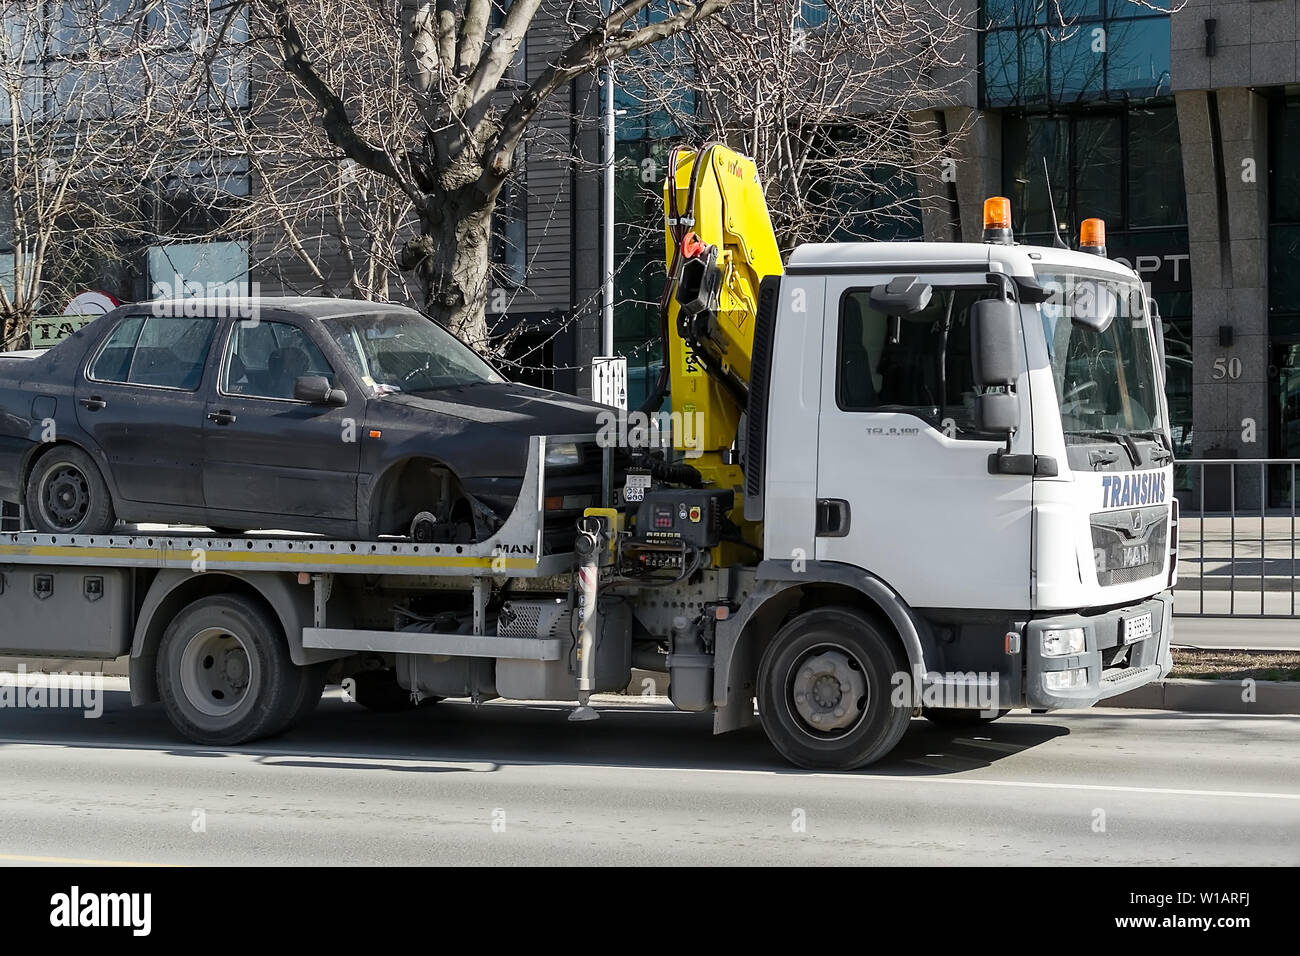 Varna, Bulgaria, February 28, 2019. A tow truck with hook and chain transports a car without a front wheel along the city street during the day. The c Stock Photo